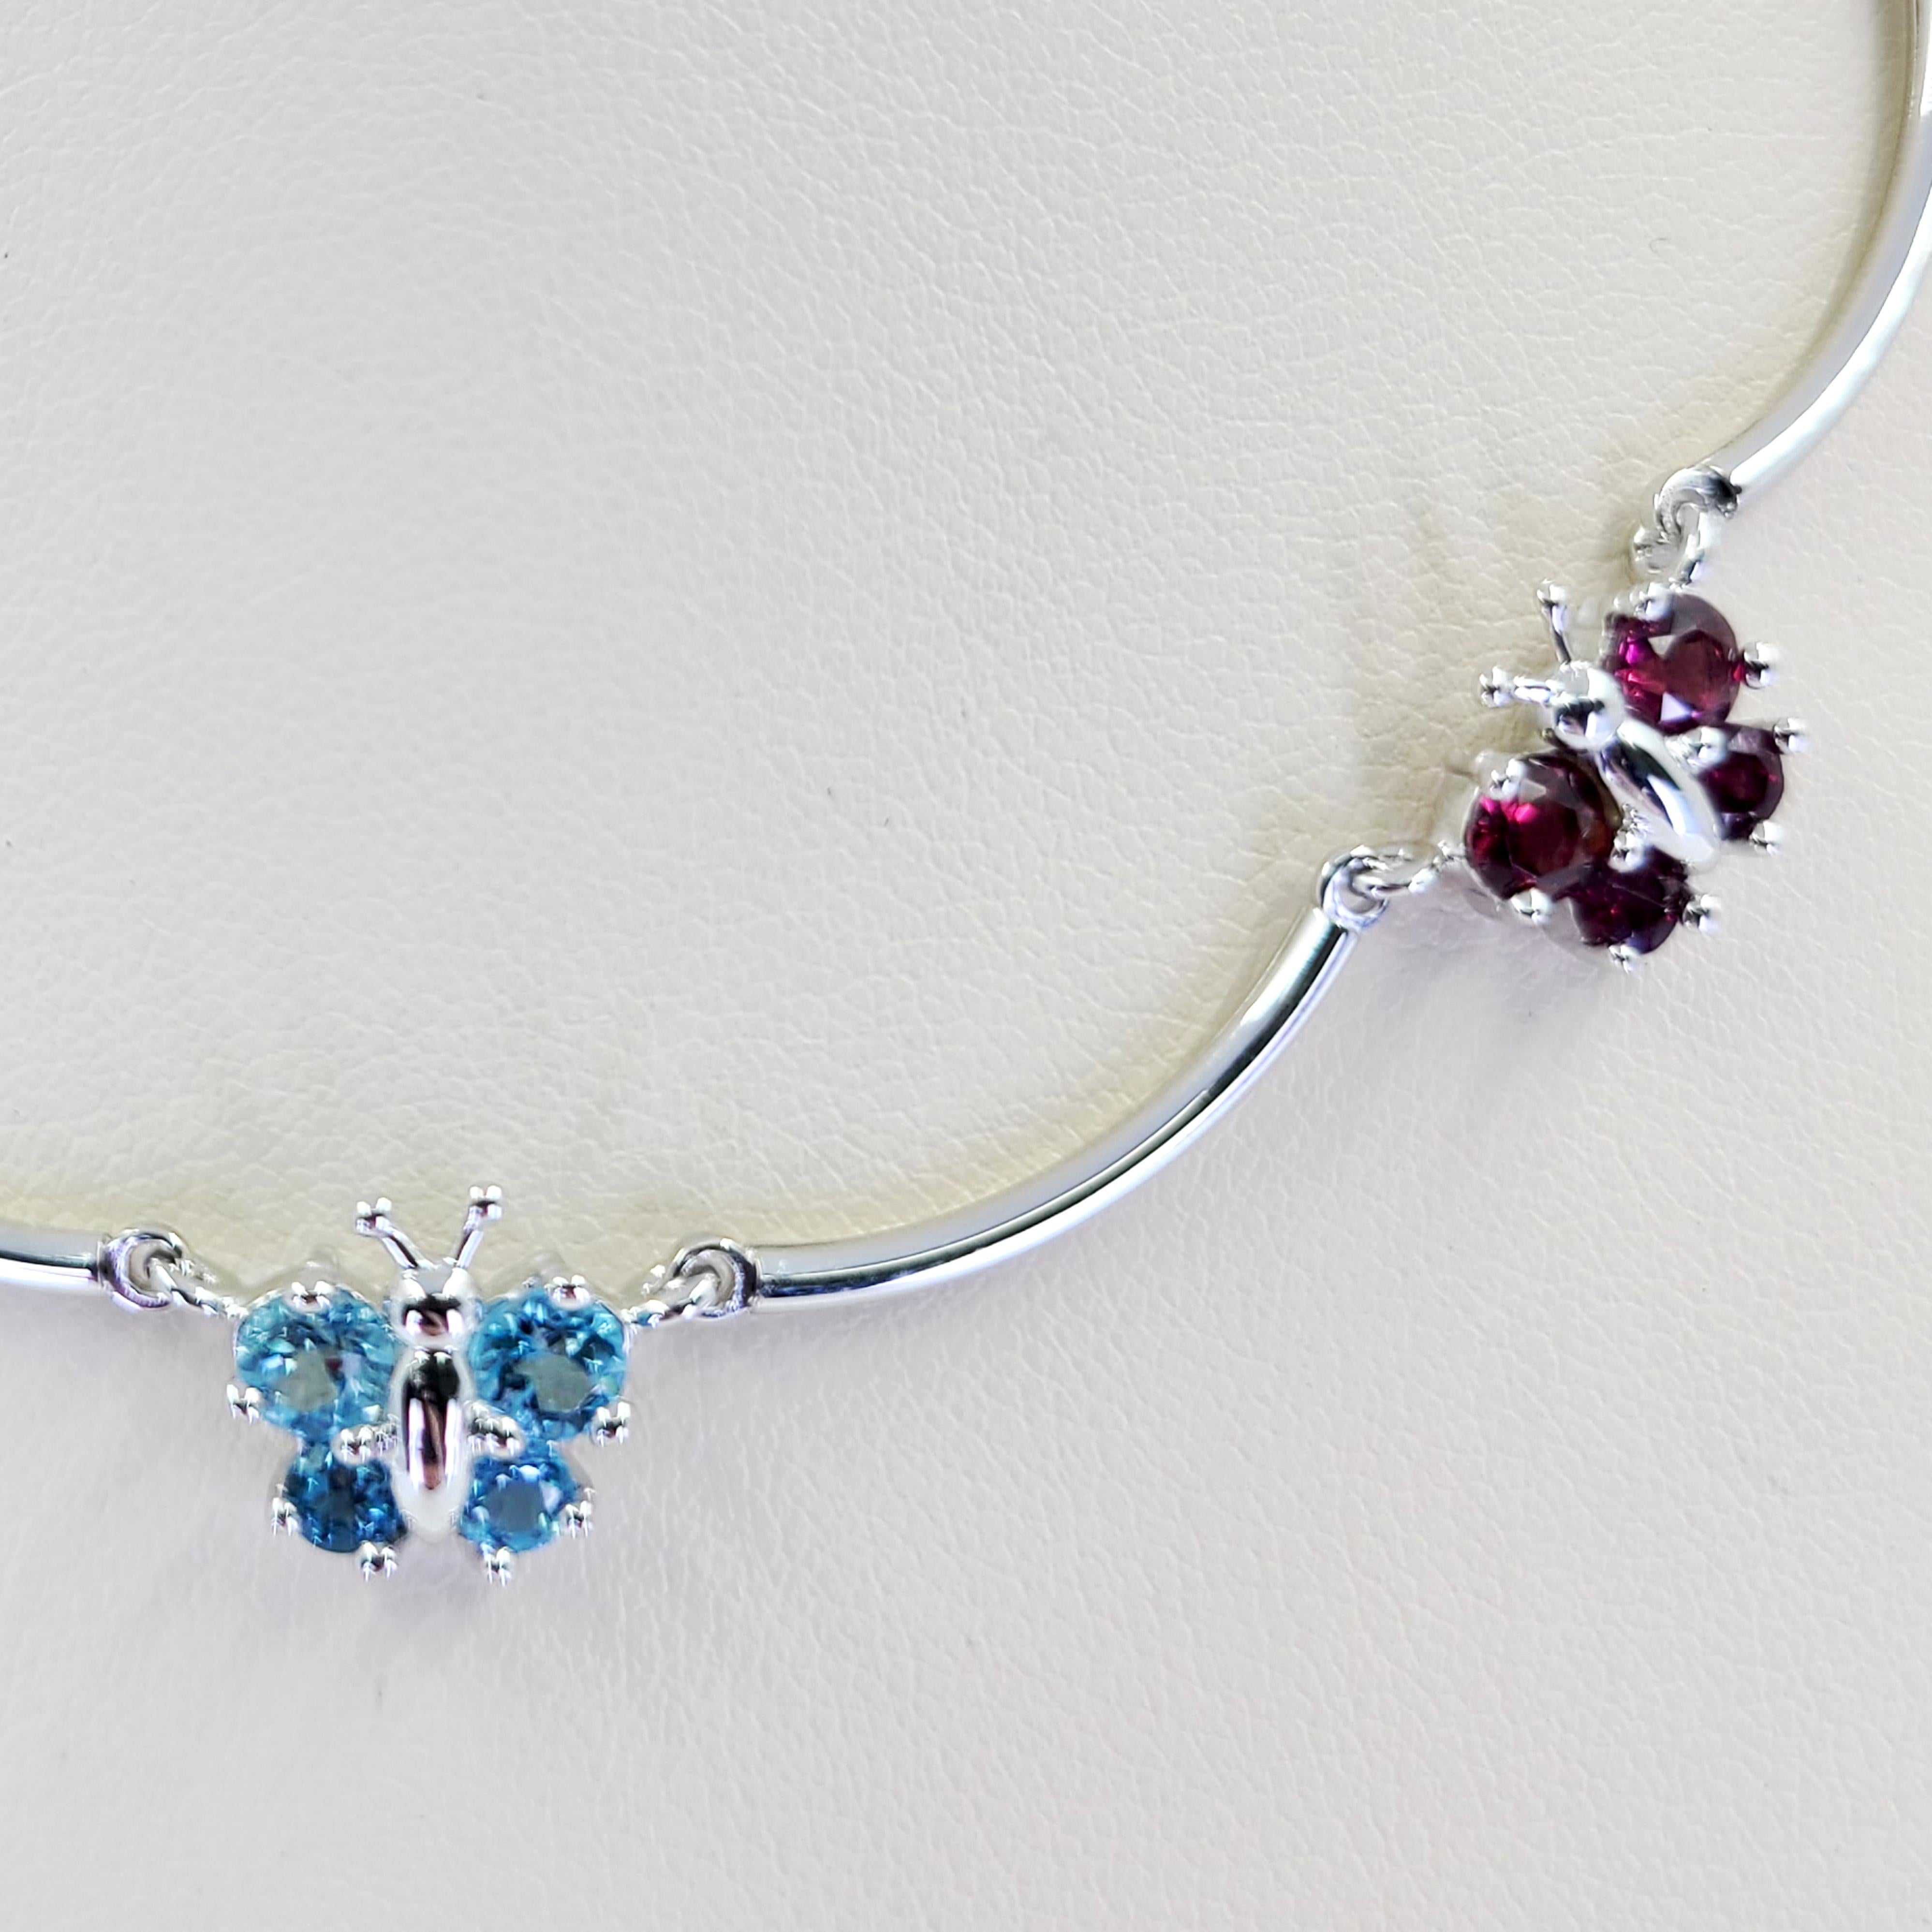 18 Karat White Gold Scalloped Butterfly Collar Necklace Featuring 12 Round Blue Topaz Totaling Approximately 1.00 Carat and 8 Round Garnet Totaling Approximately 0.60 Carat. 15 Inch Length with Lobster Clasp. Finished Weight Is 15.0 Grams.